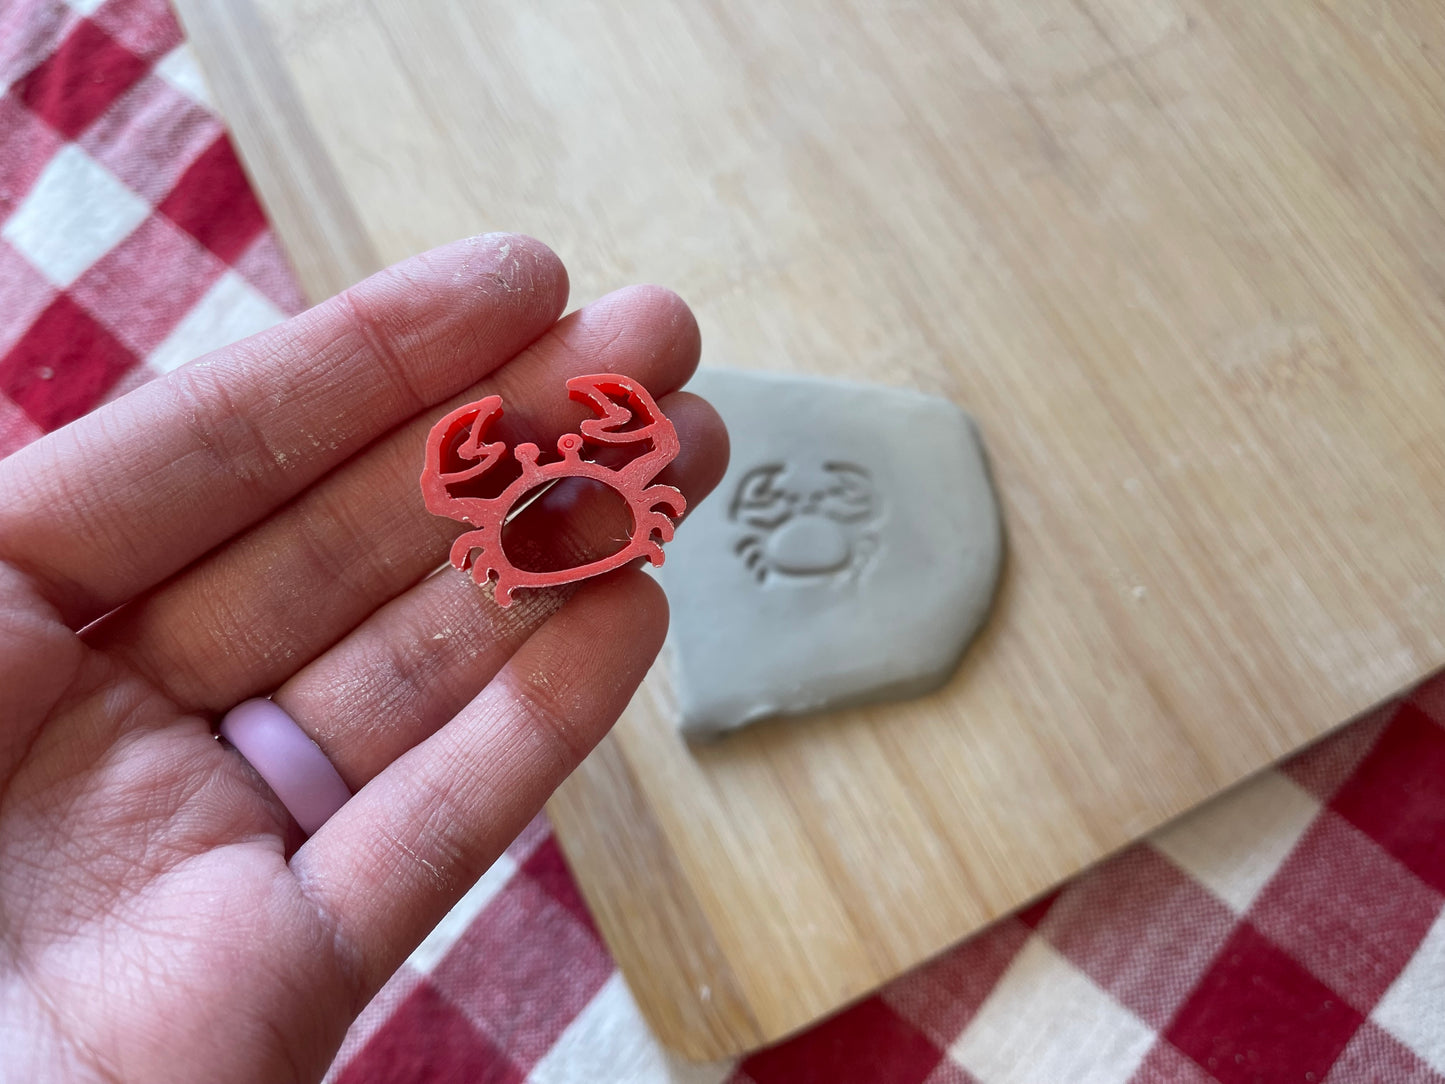 Crab Mini Pottery Stamp - Alabama Clay Conference, plastic 3D printed, multiple sizes